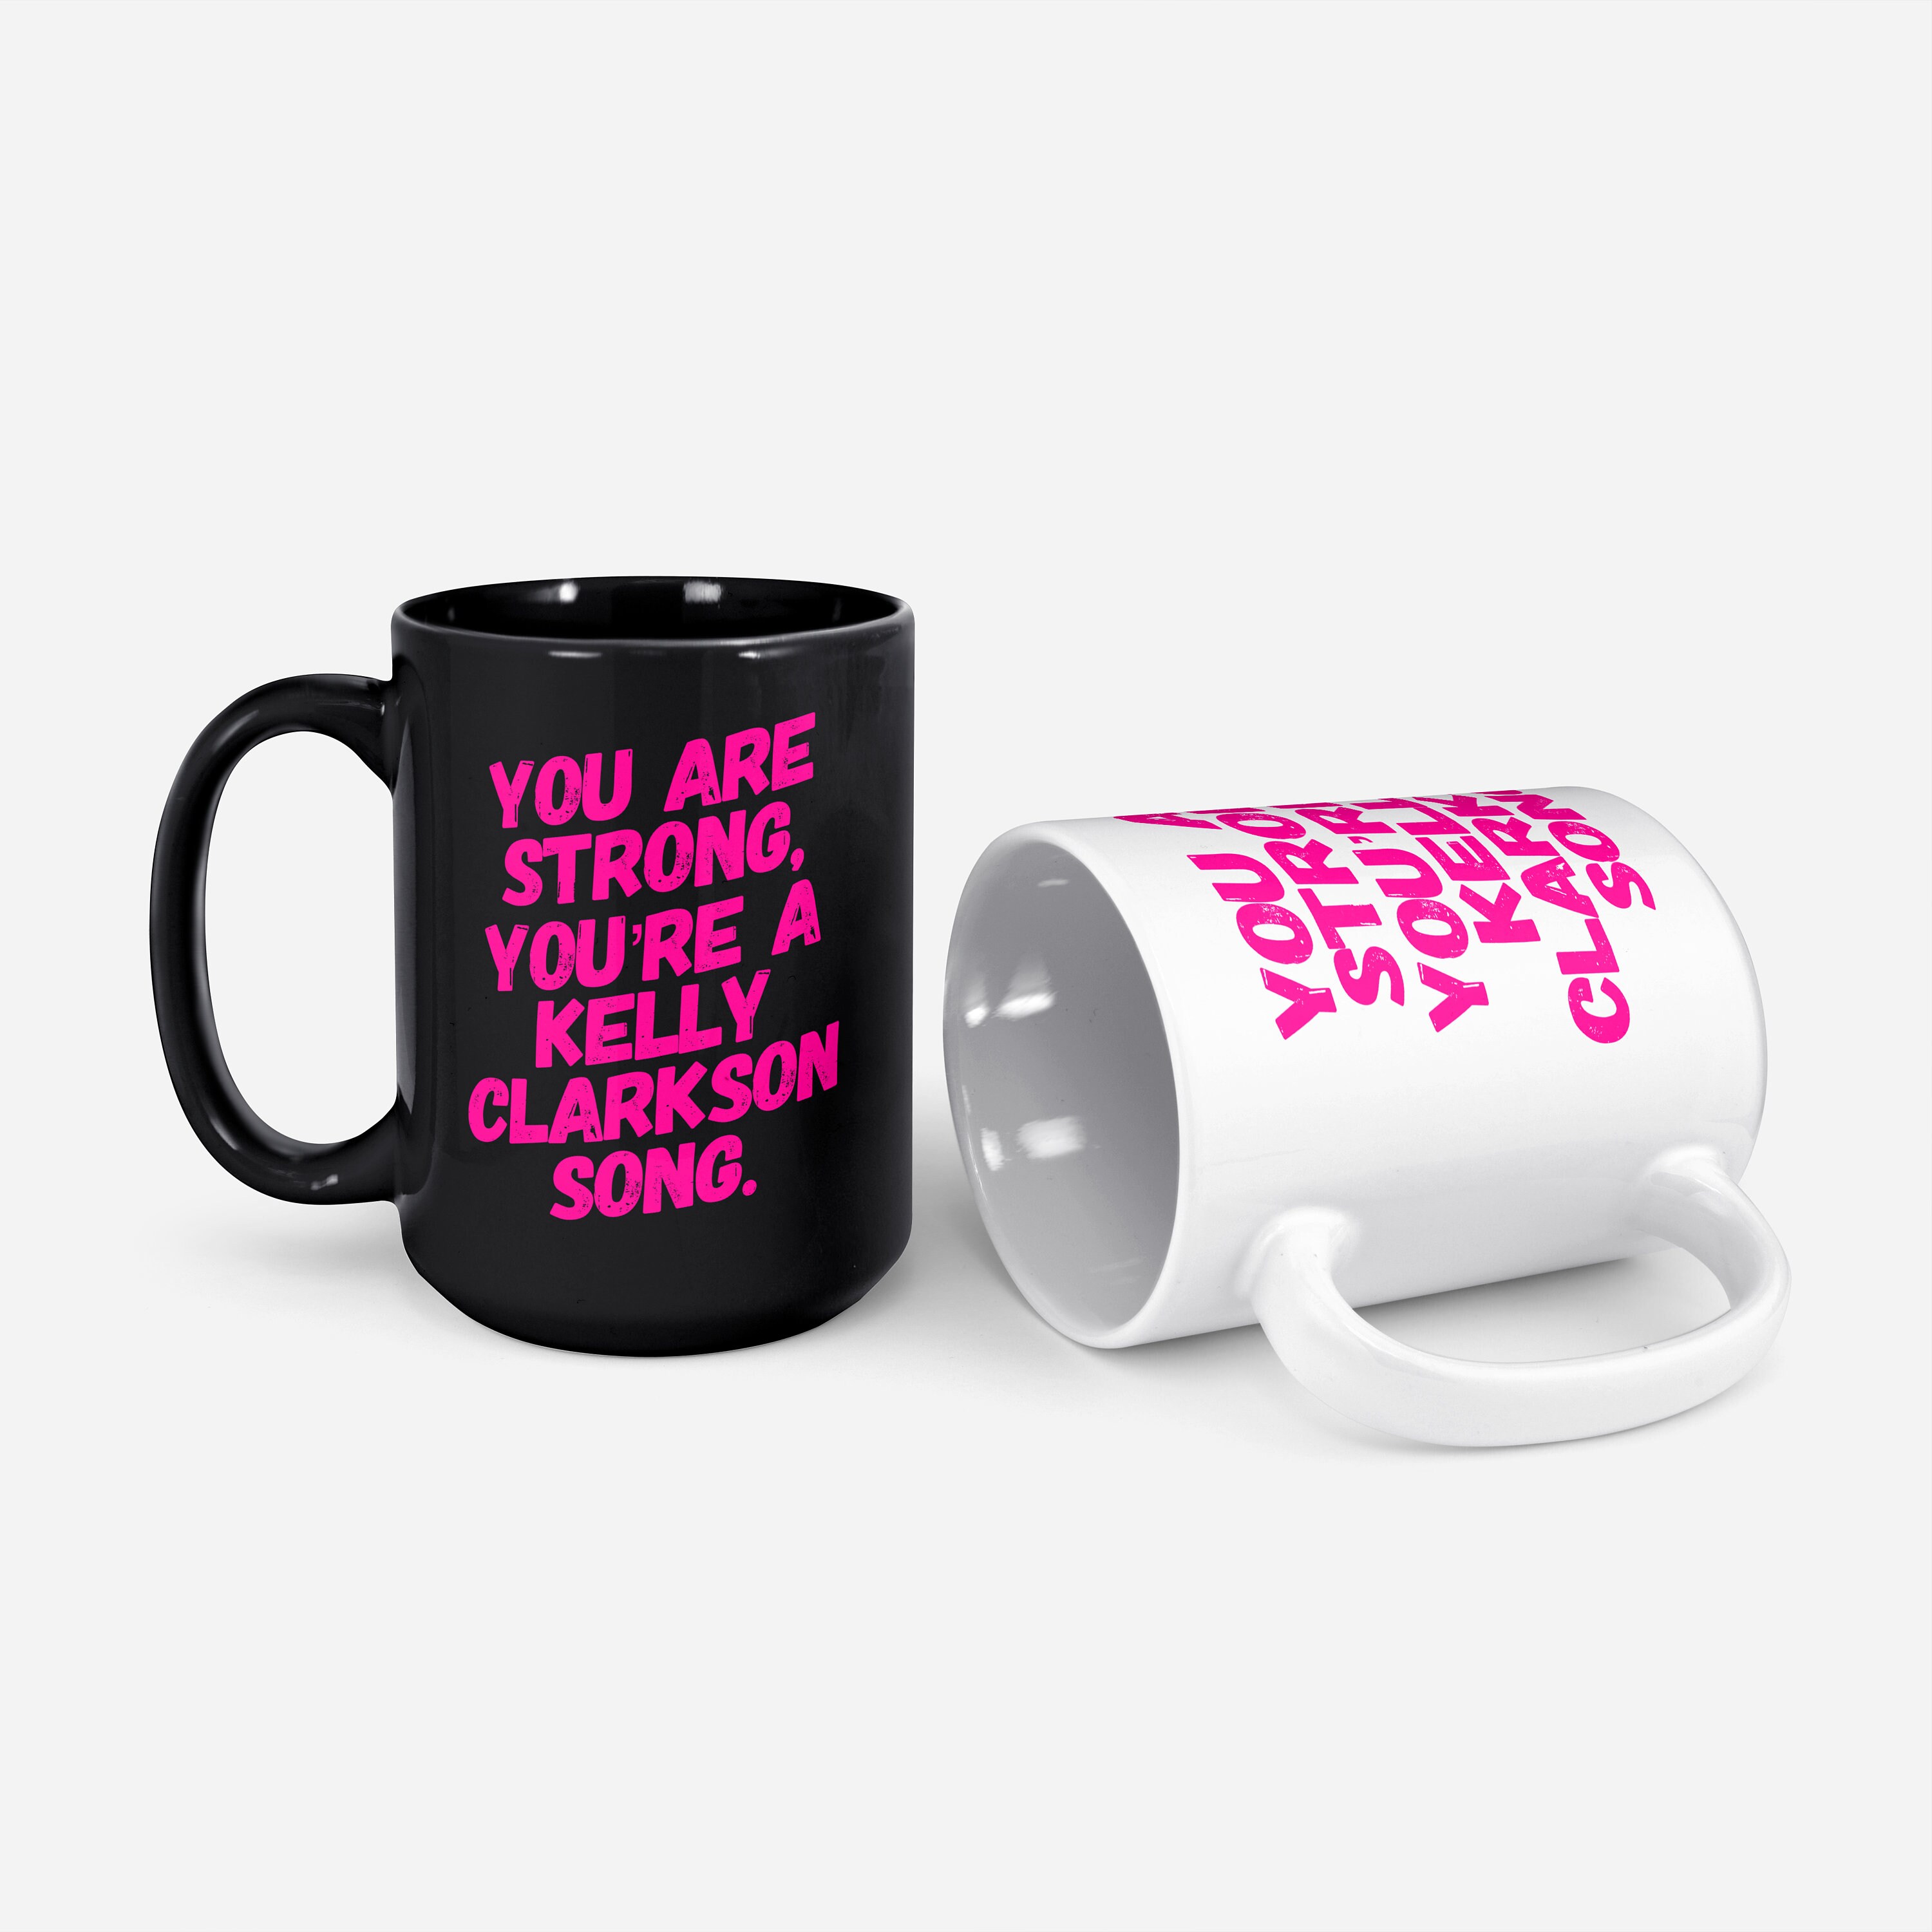 Queer Eye Mug You Are Strong You're a Kelly Clarkson - Etsy